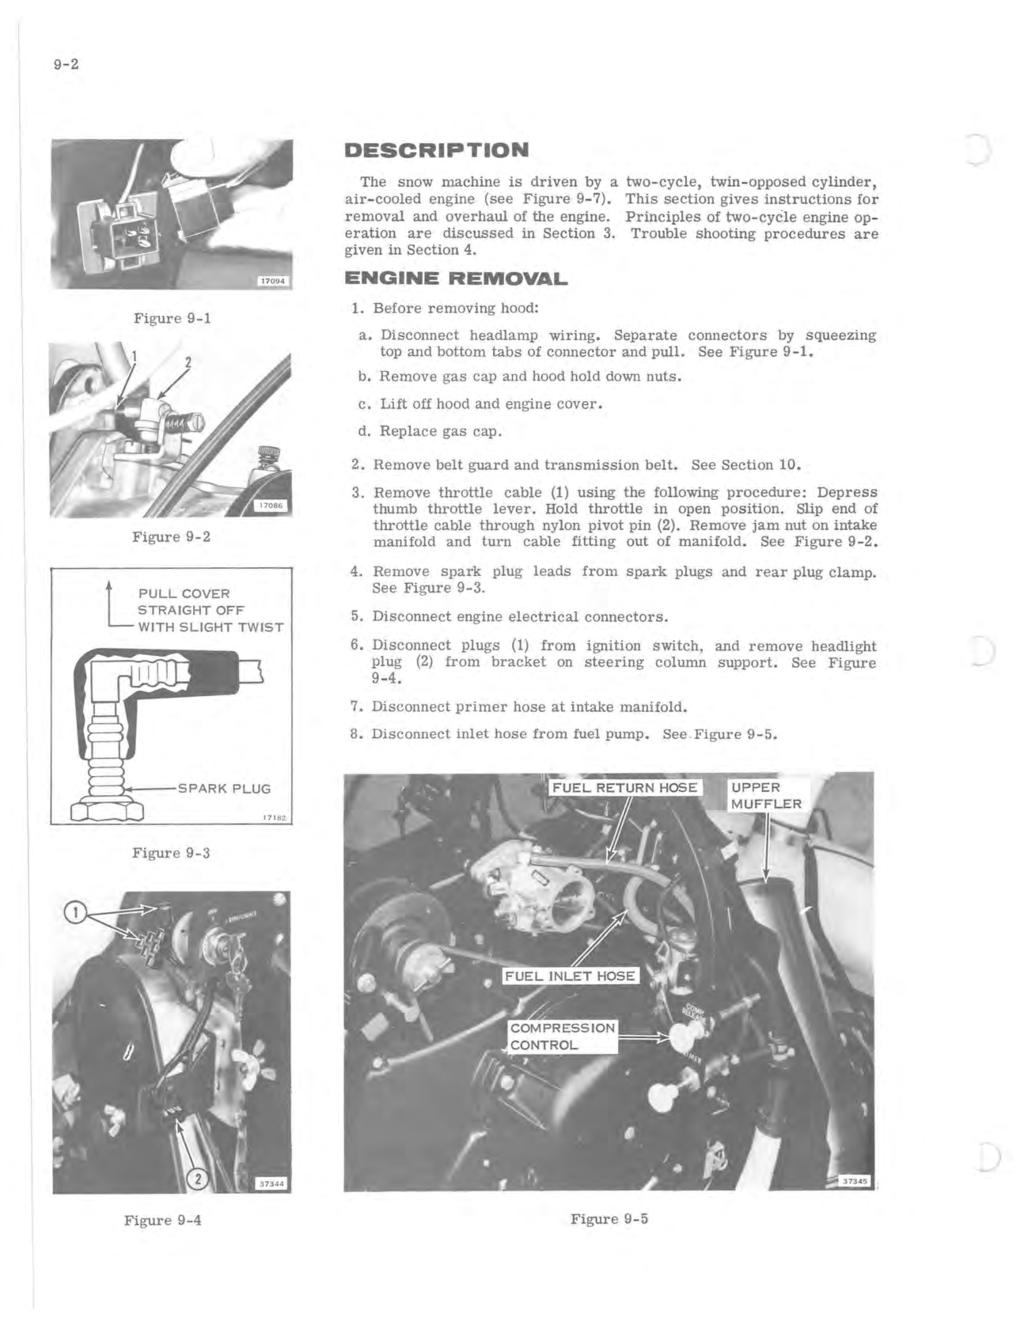 9-2 Figure 9-1 Figure 9-2 L PULL COVER STRAIGHT OFF WITH SLIGHT TWIST DESCRIPTION The snow machine is driven by a two-cycle, twin- opposed cylinder, air-cooled engine (see Figure 9-7).